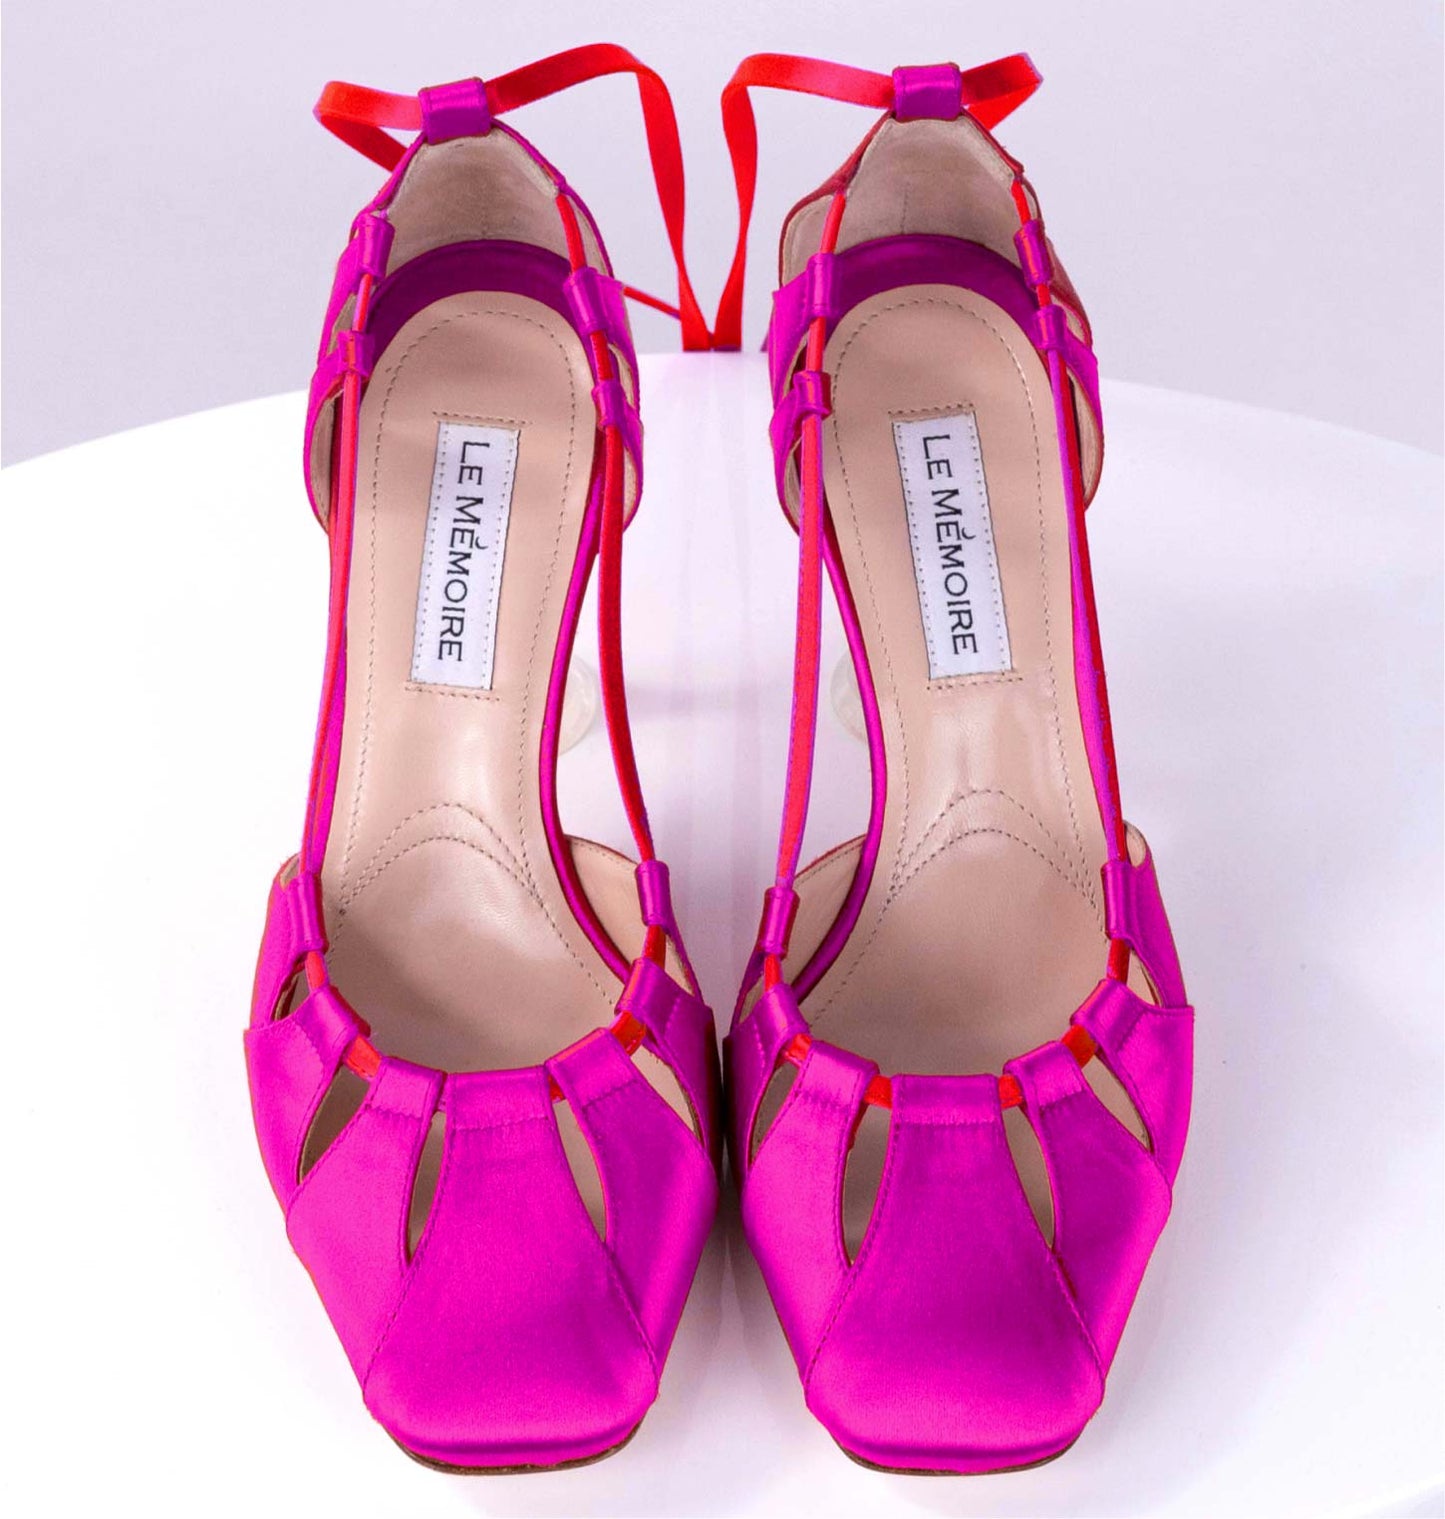 "ANTARES" Fuchsia+Red- Satin Laced Up Pump